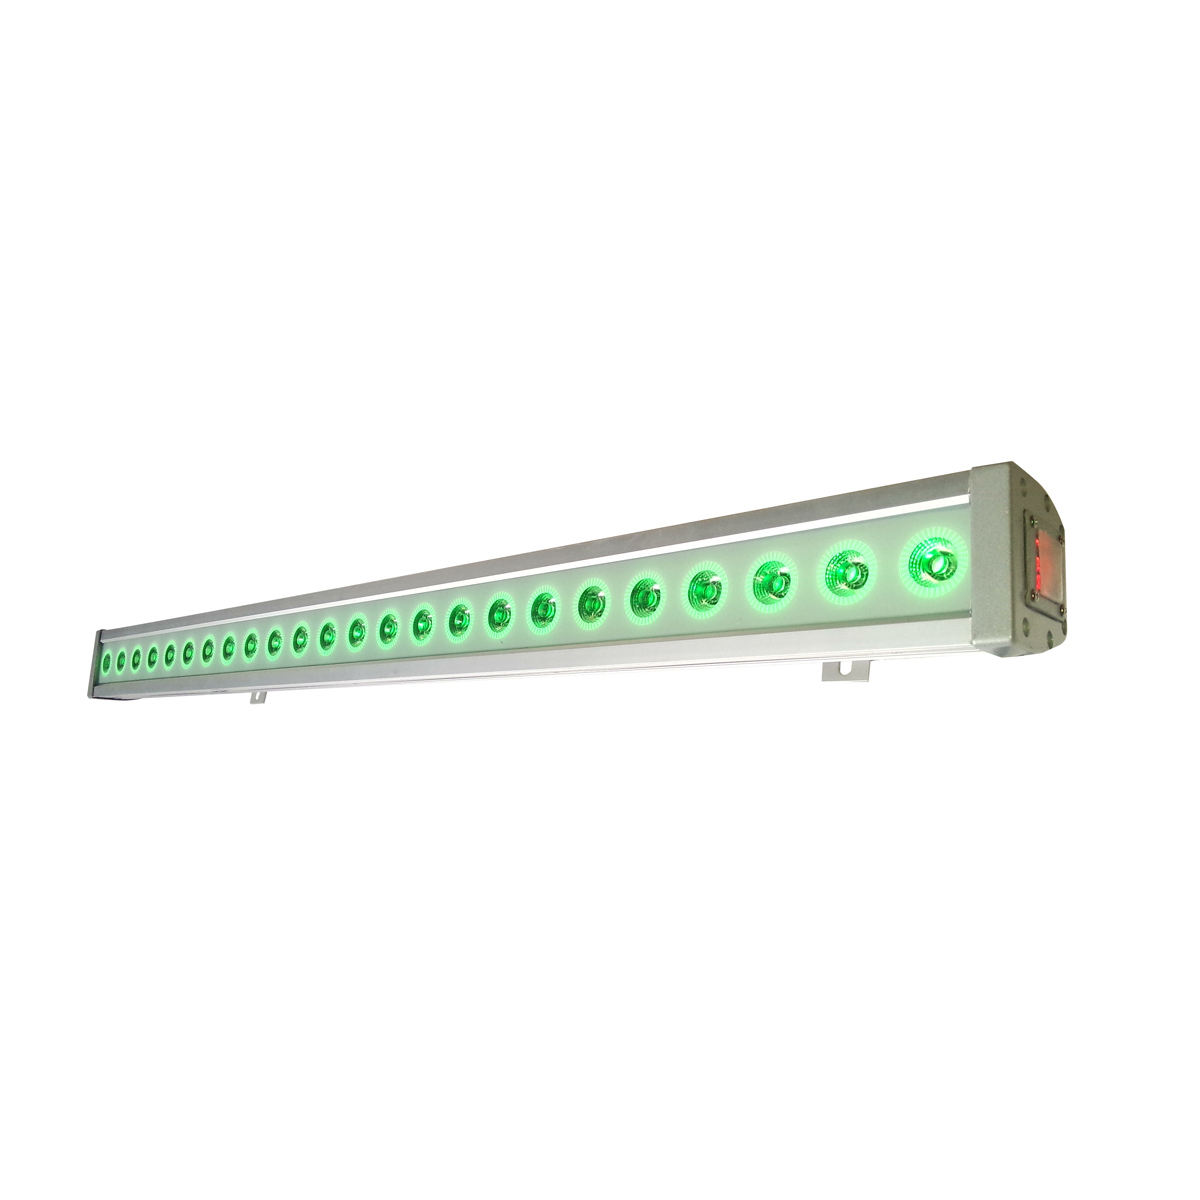 24pcs Led Wall Wash Outdoor Lighting Bar 4in1 With Dmx Lights For Building Exterior FD-AW2404D 